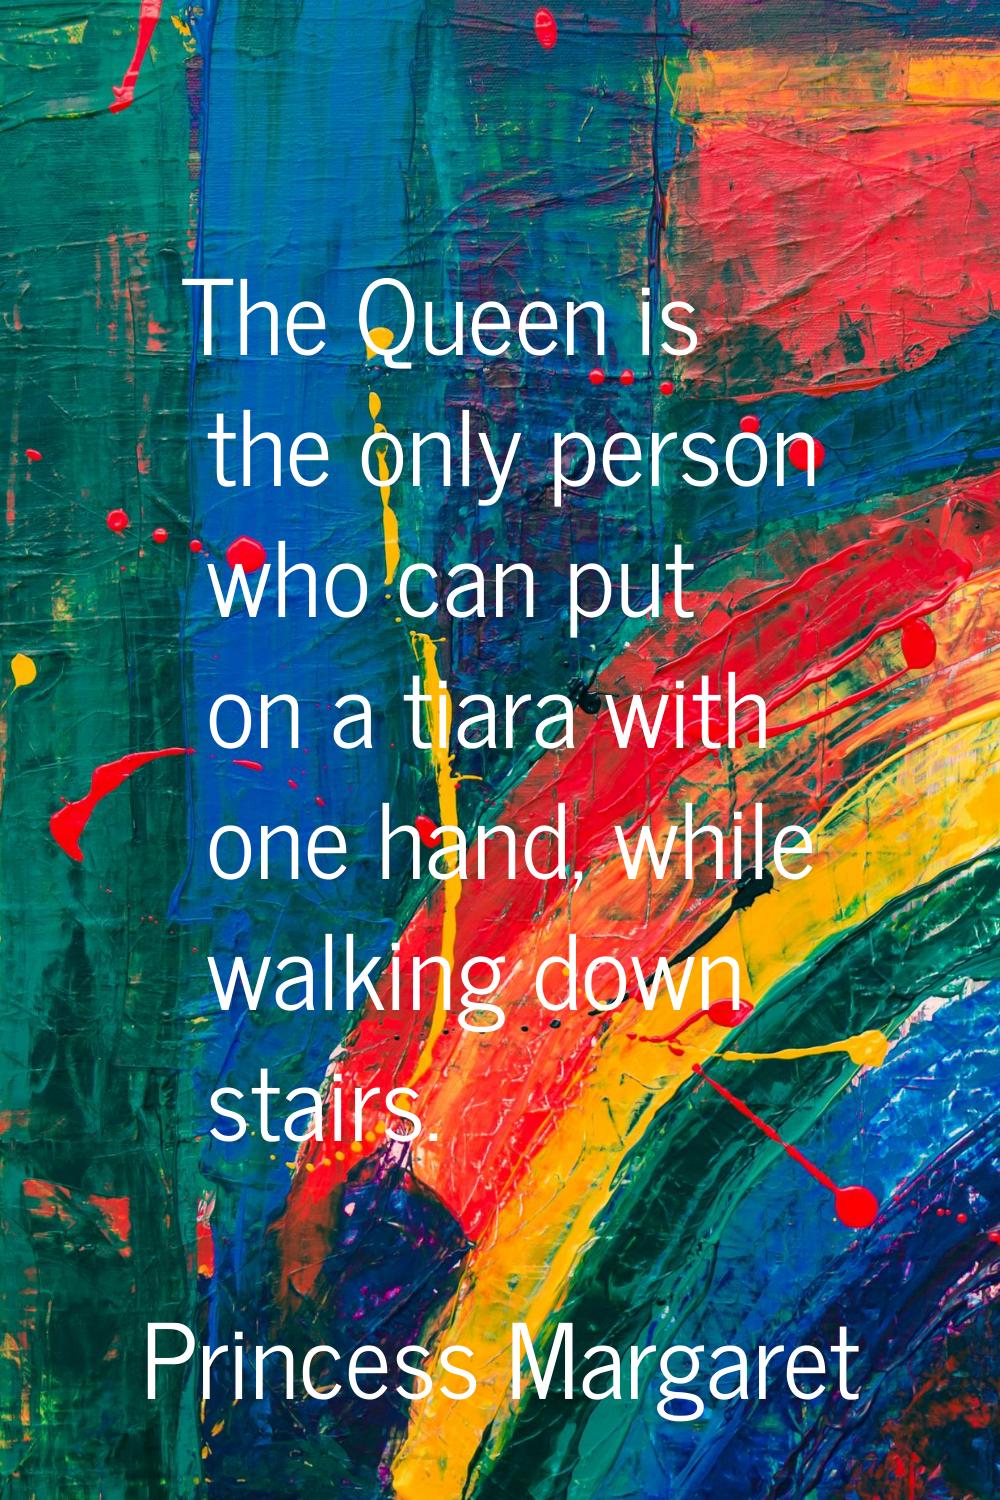 The Queen is the only person who can put on a tiara with one hand, while walking down stairs.